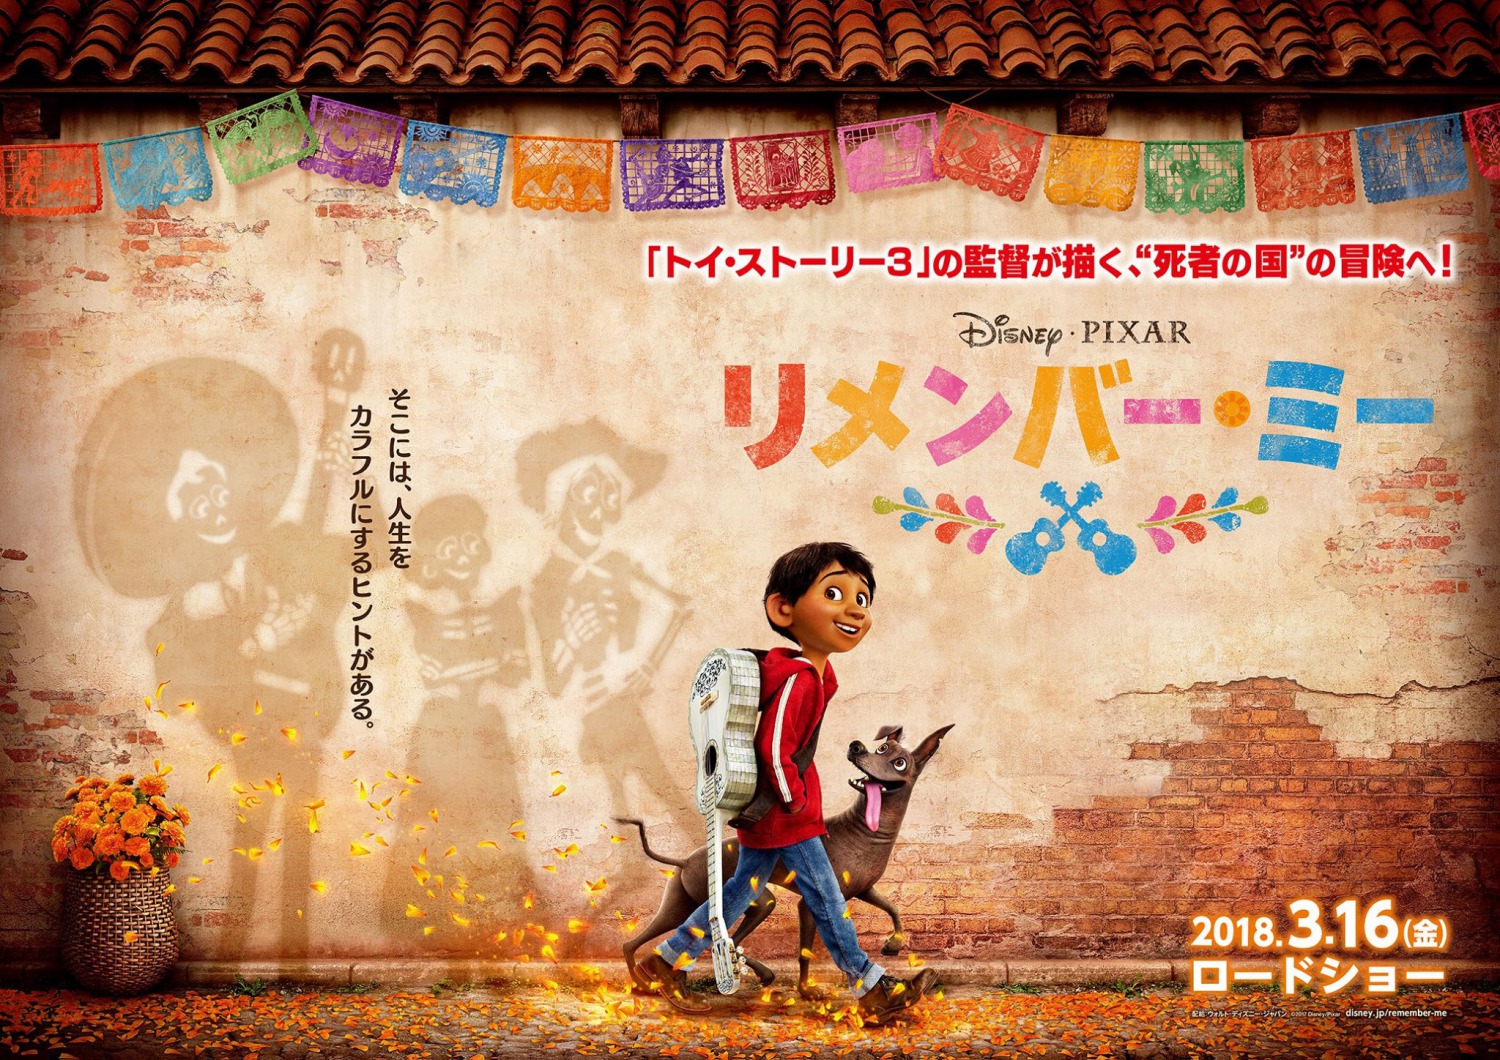 Extra Large Movie Poster Image for Coco (#4 of 17)